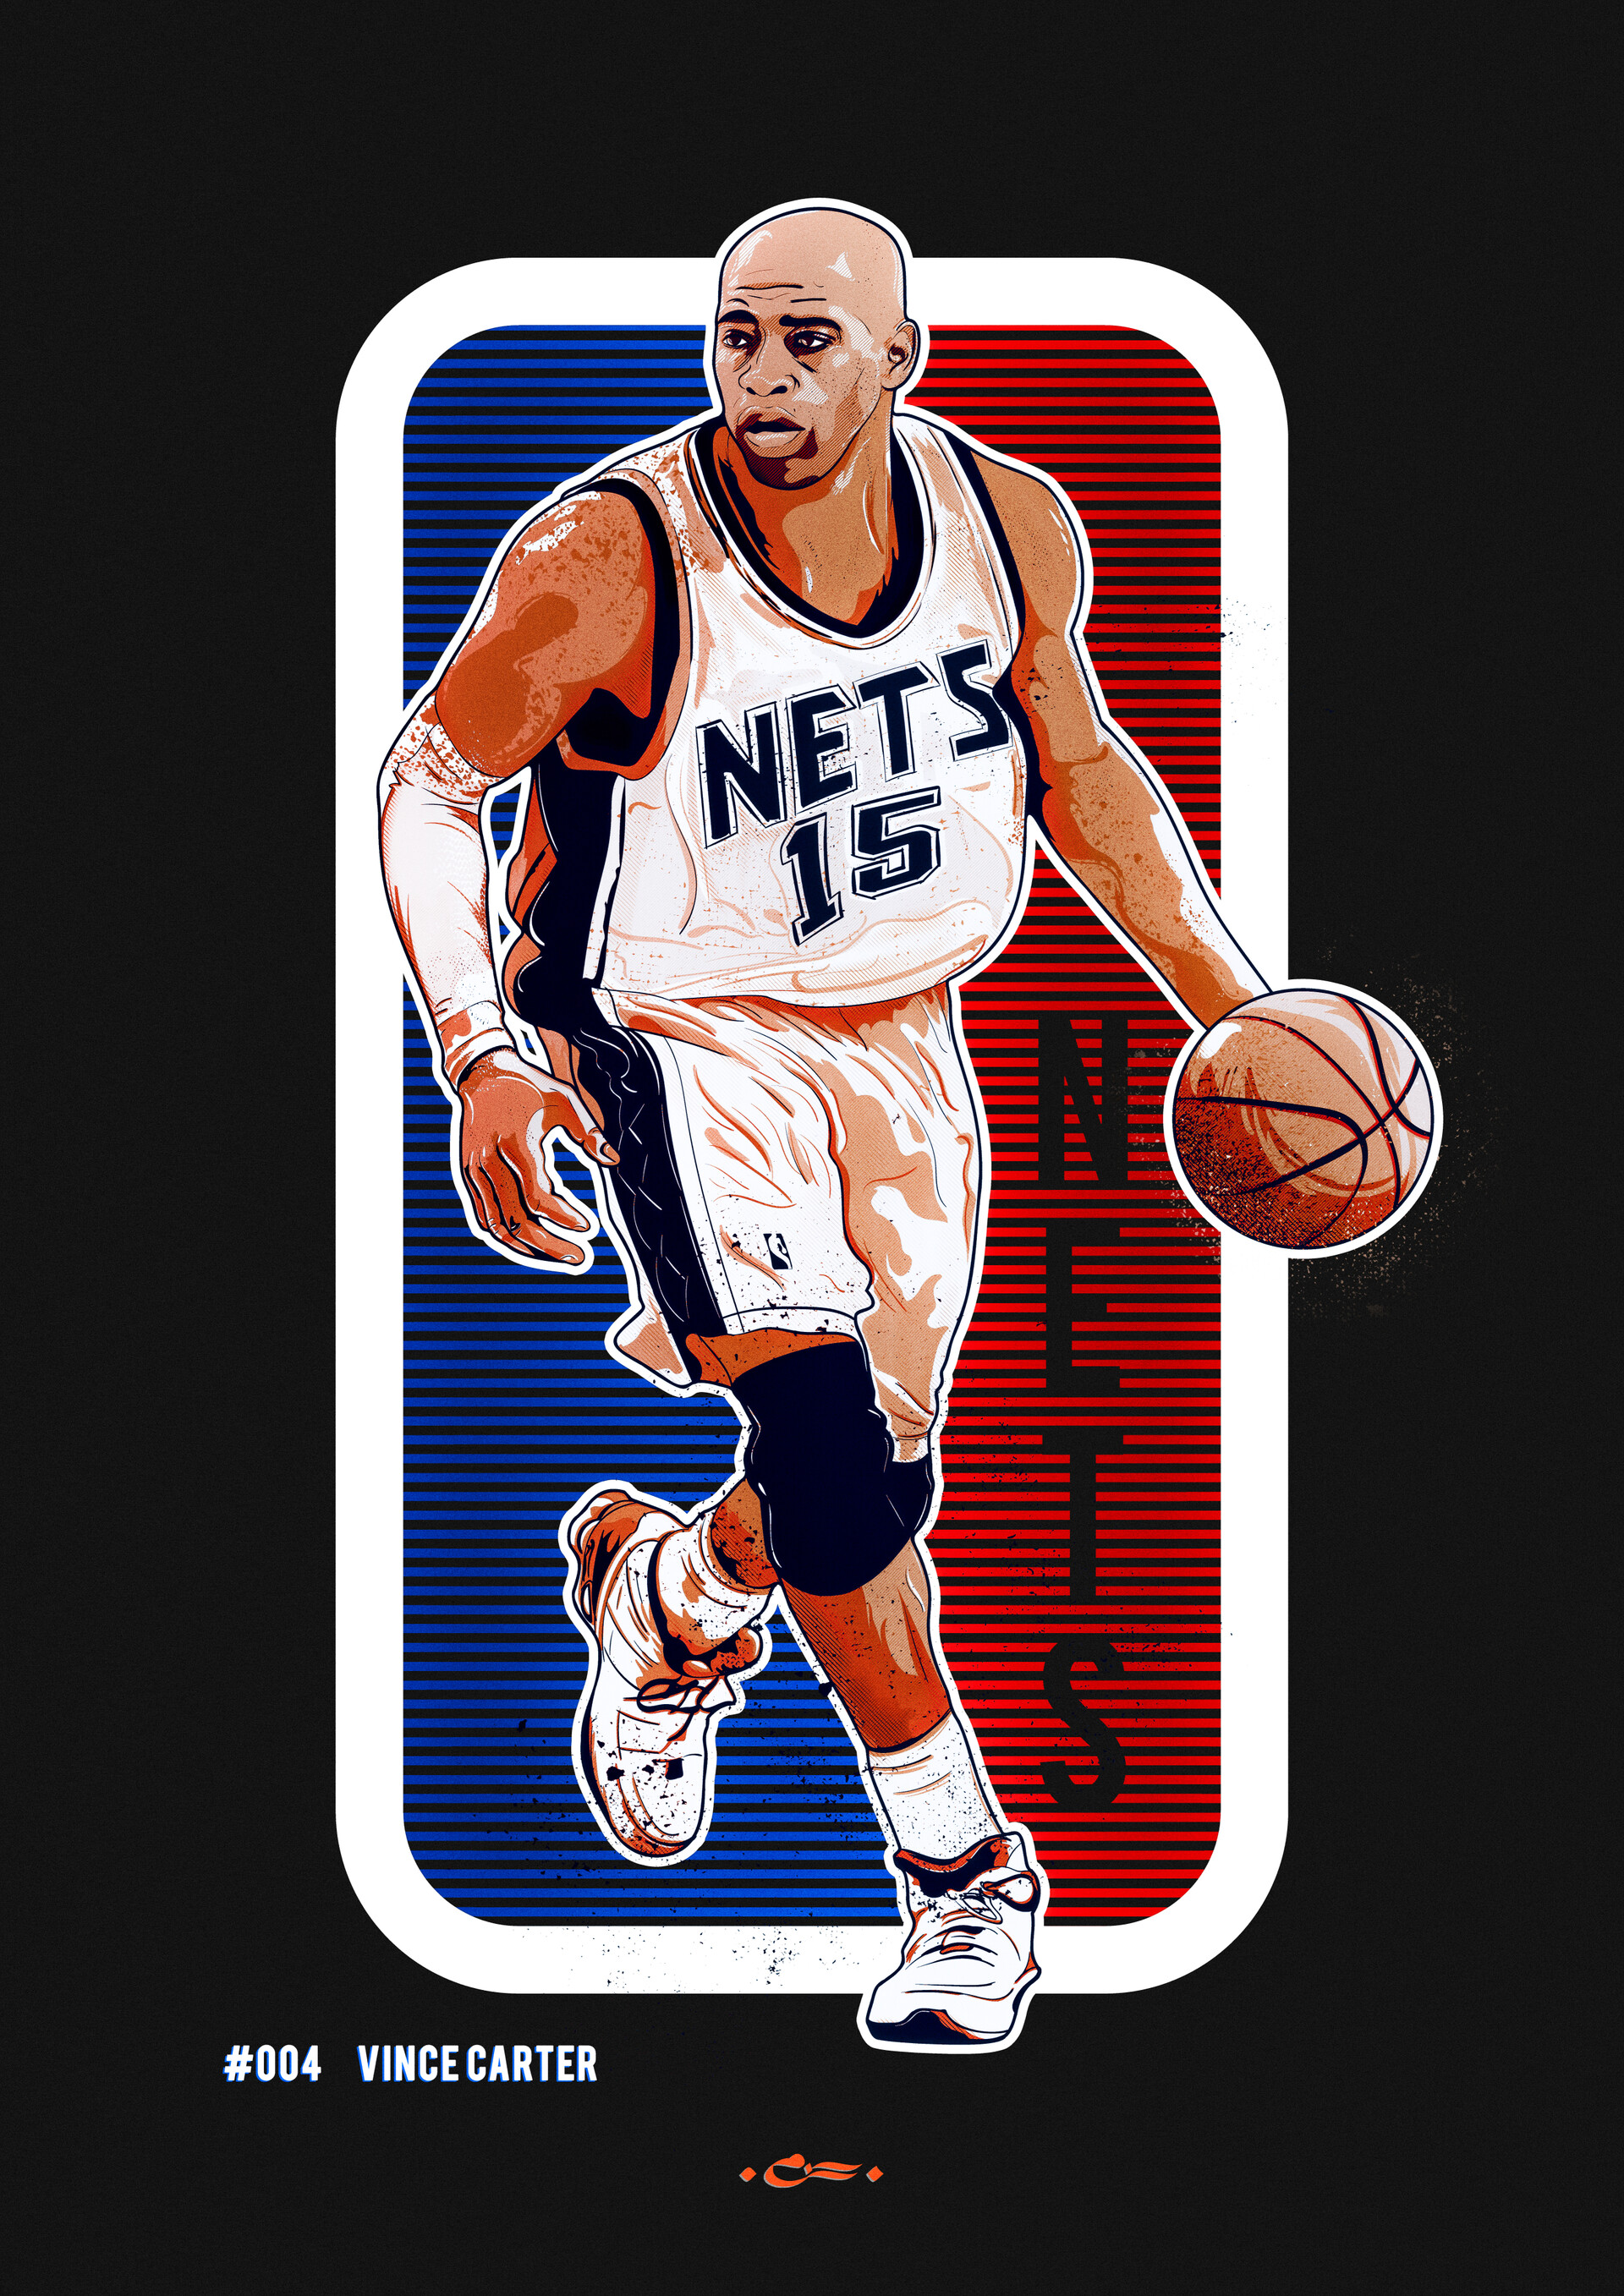 vince carter on the nets